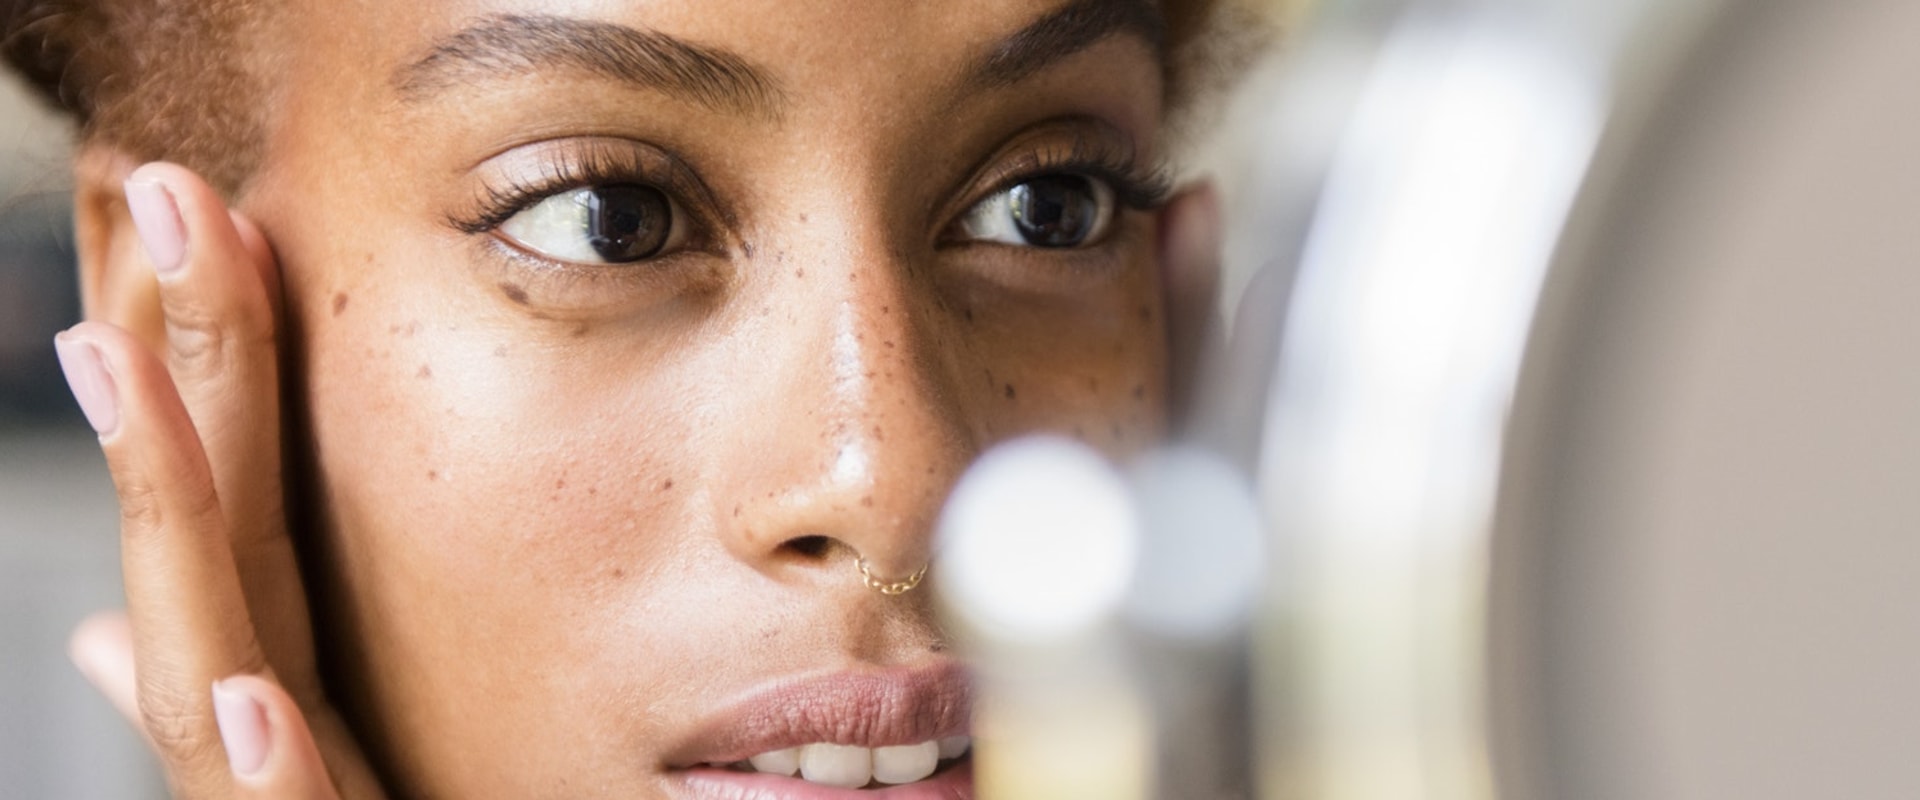 What are the best beauty and health tips for preventing acne?